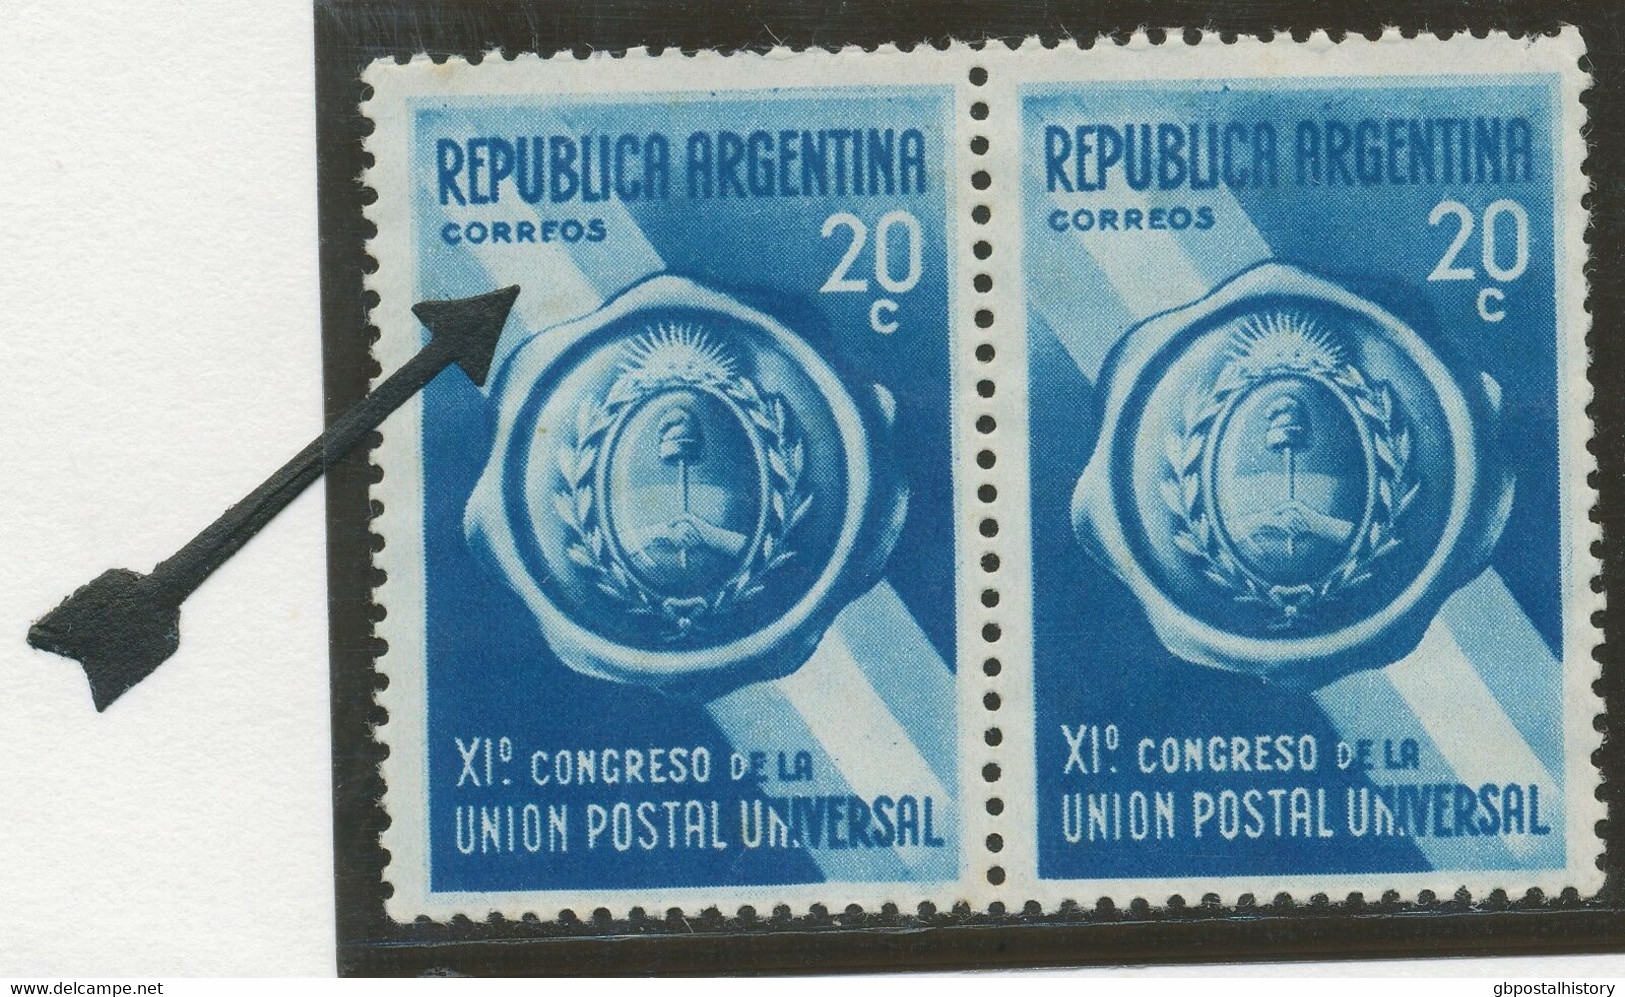 ARGENTINA 1939 11th UPU 20 C Blue M/M VARIETY "CORRFOS" Instead Of "CORREOS", R! - Unused Stamps